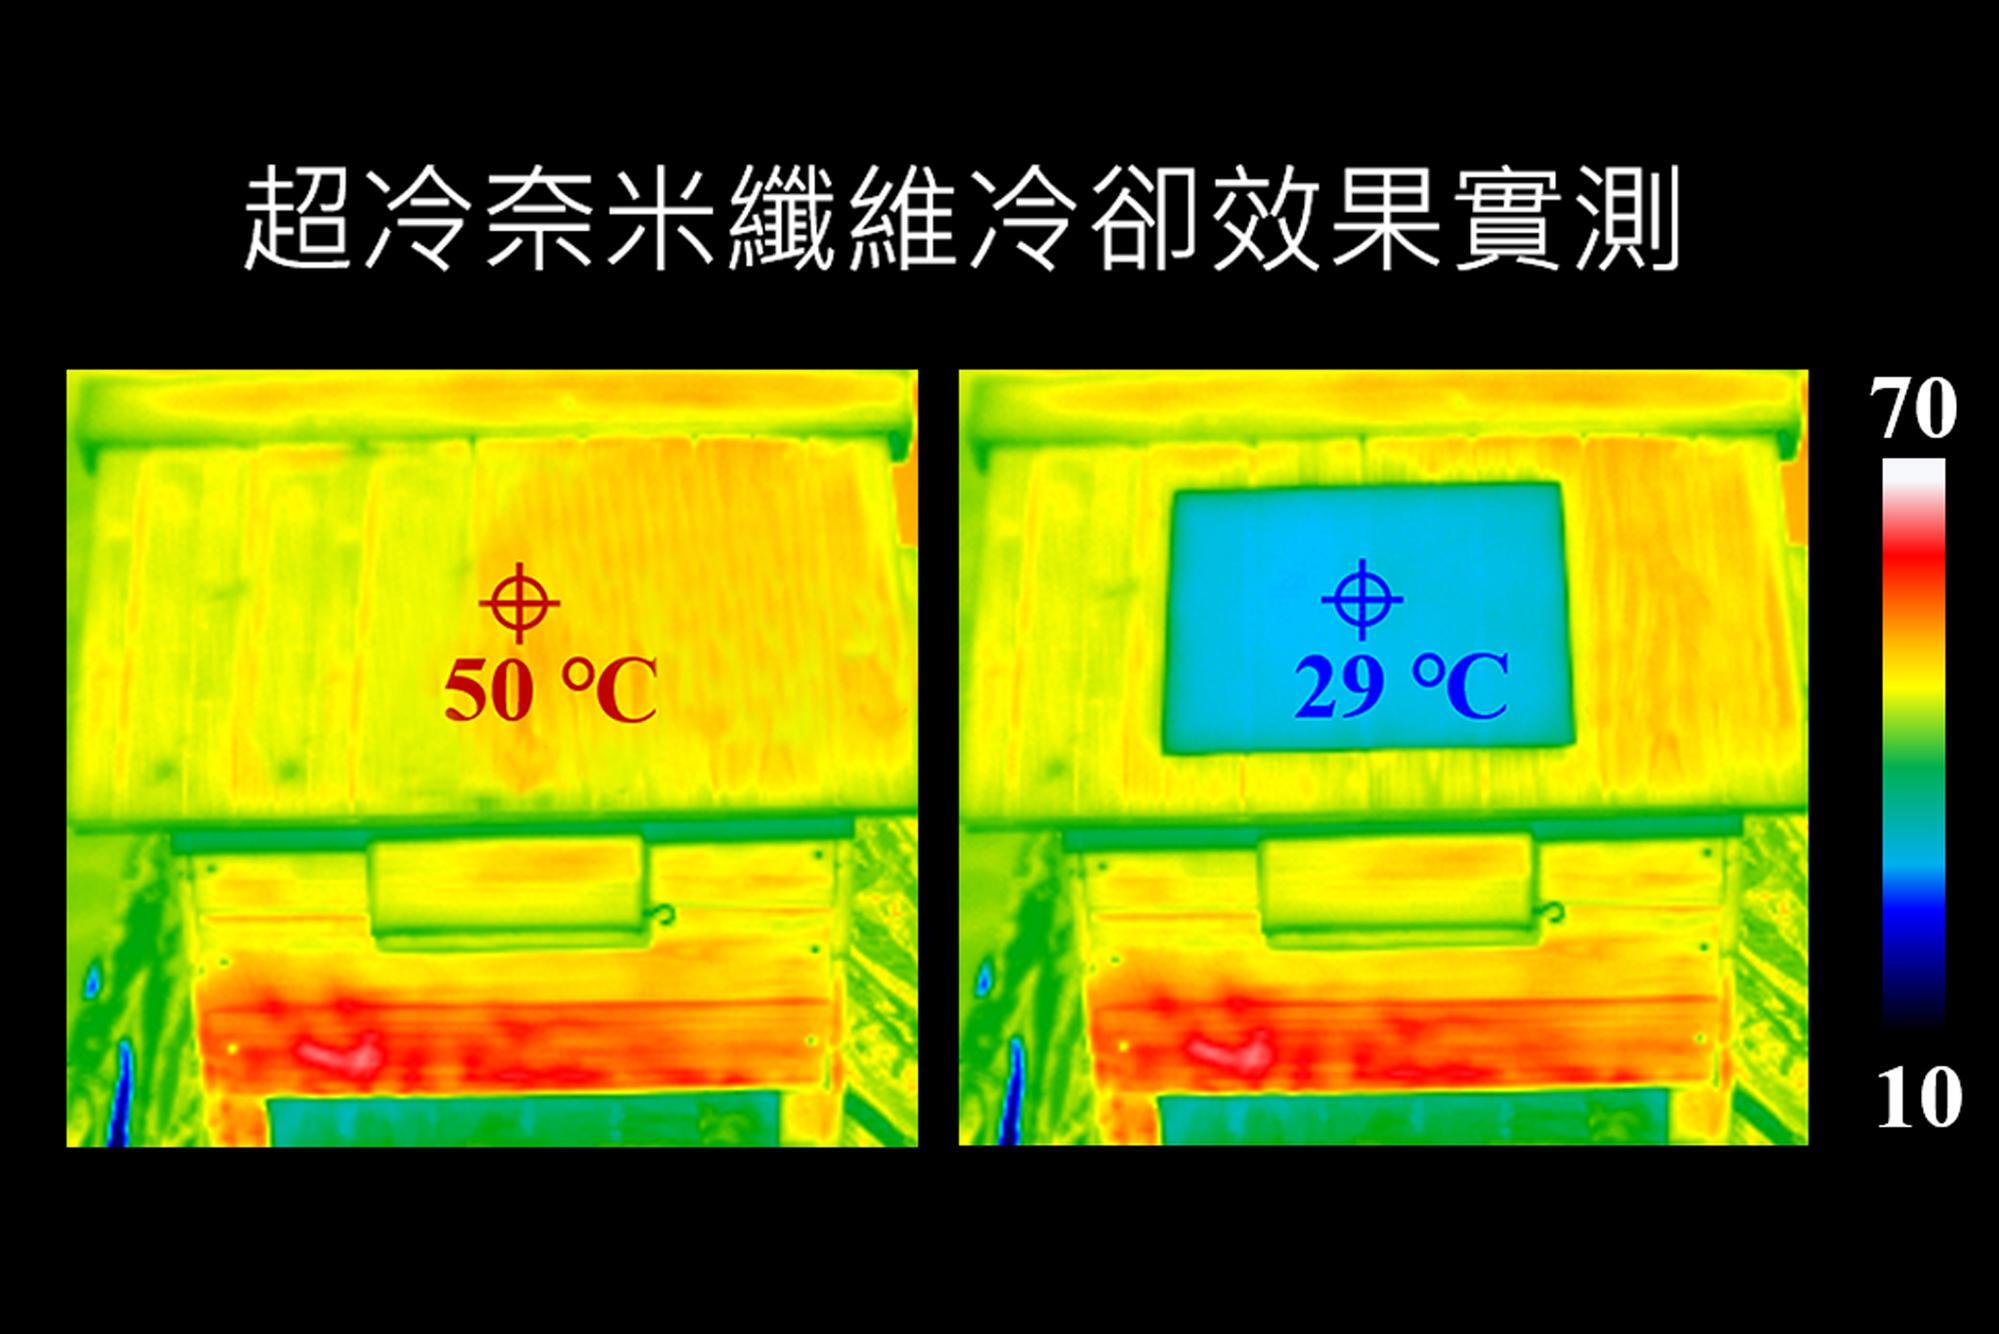 Upon applying the super-cooling nanofiber onto the roof of the model house, researchers utilized an infrared thermal imager to gauge the temperature. The results showed a decrease from 50˚C to 29˚C.